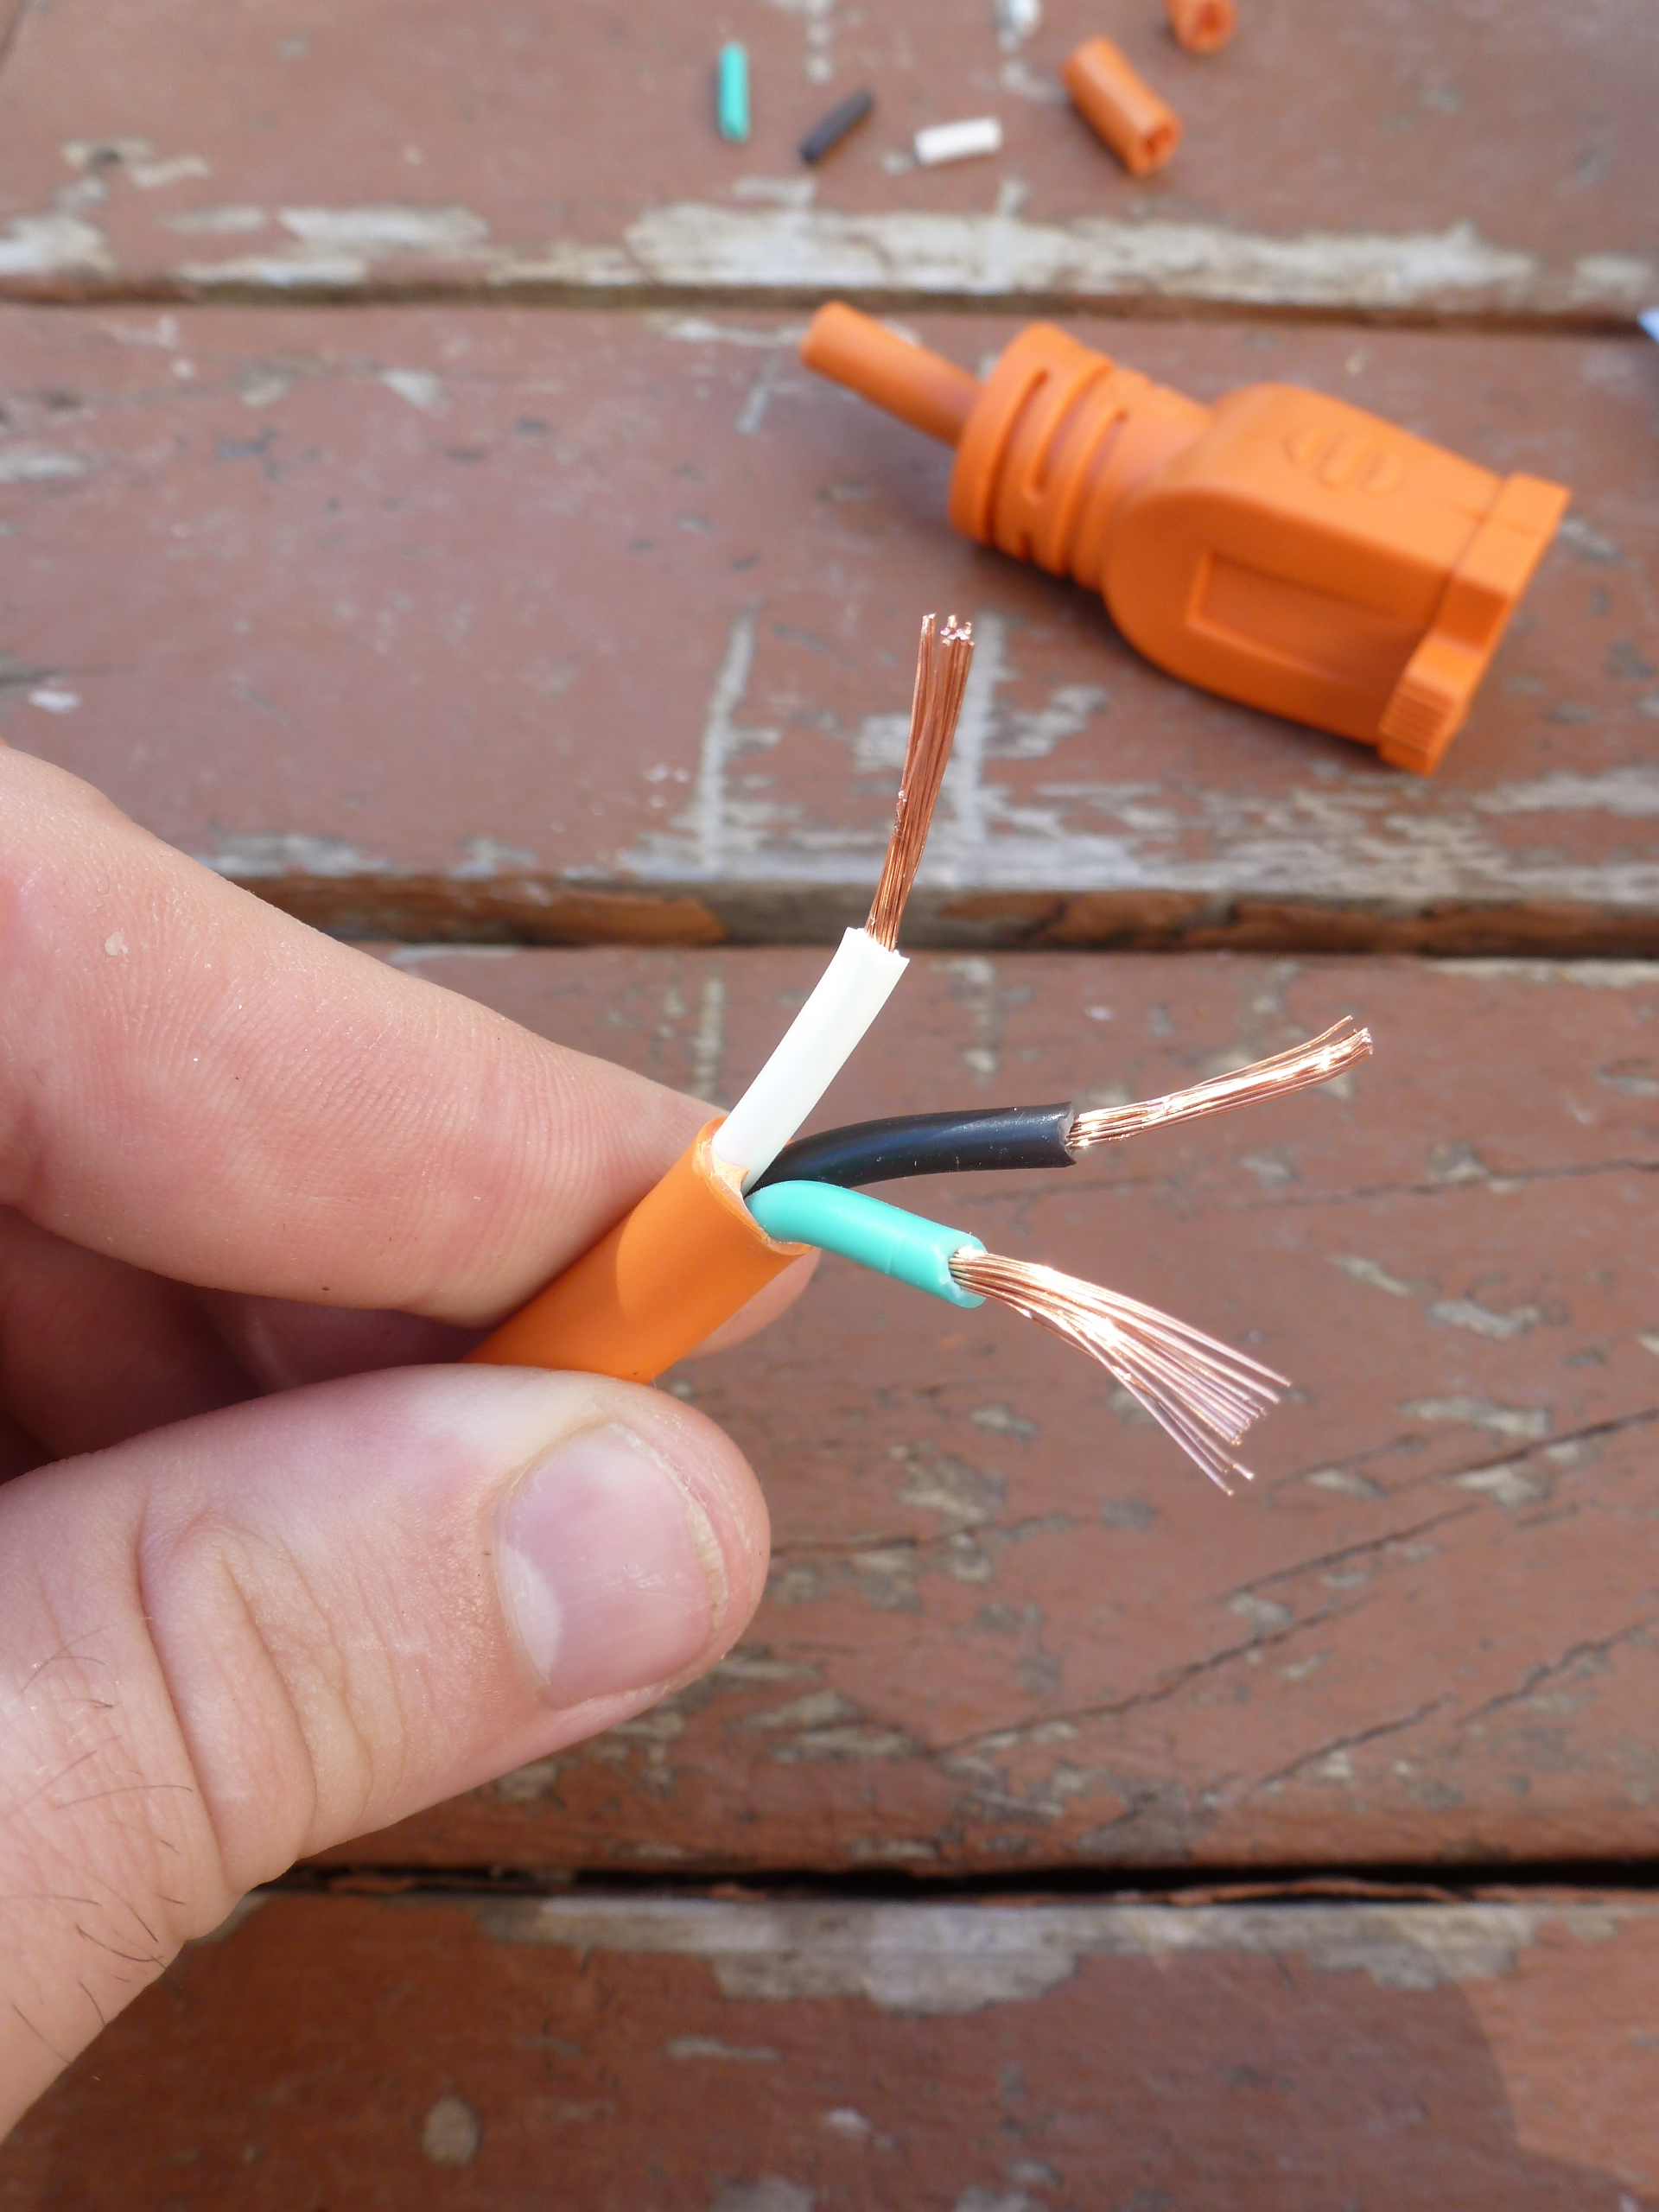 Stripping the wires in the power cable